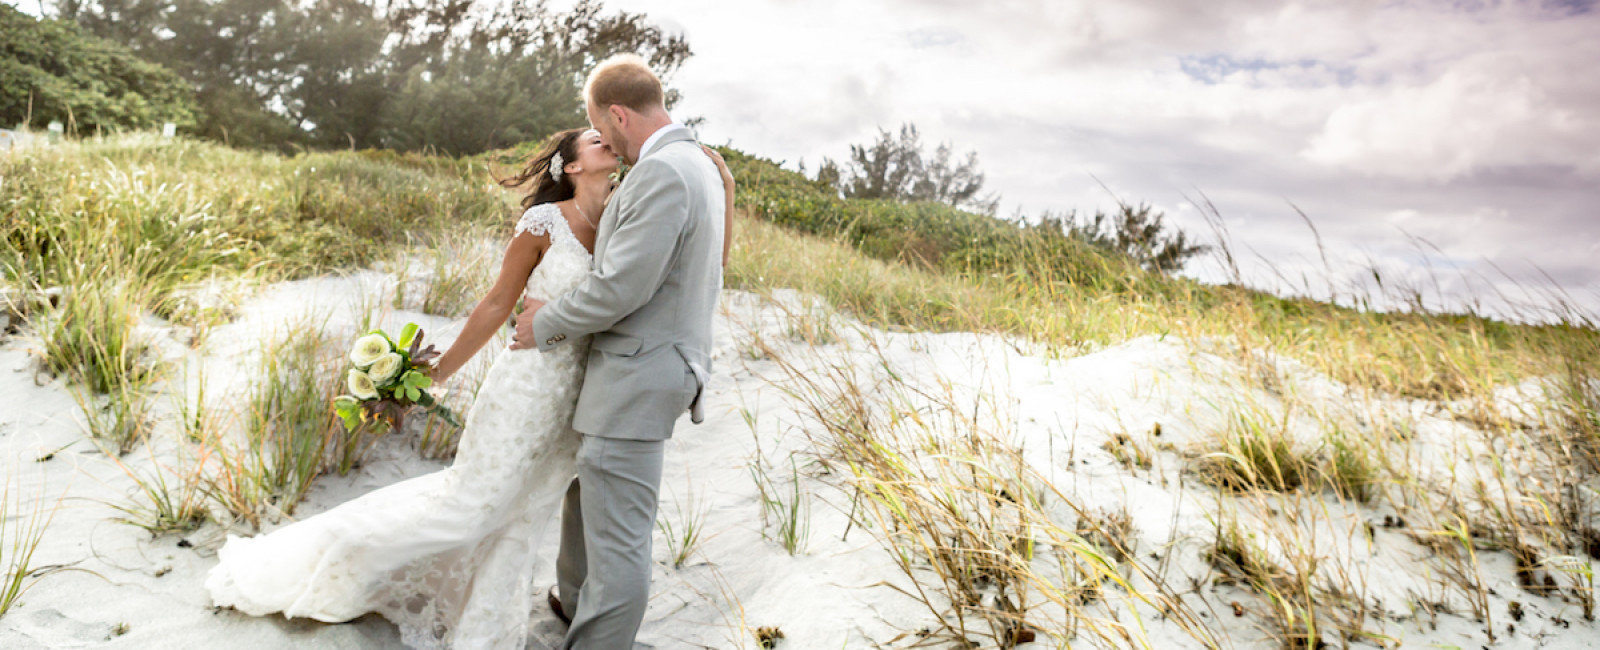 The best Miami Wedding Photographer in South Florida is Couture Bridal Photography. Image of Bride and groom in an embrace after a beach wedding ceremony